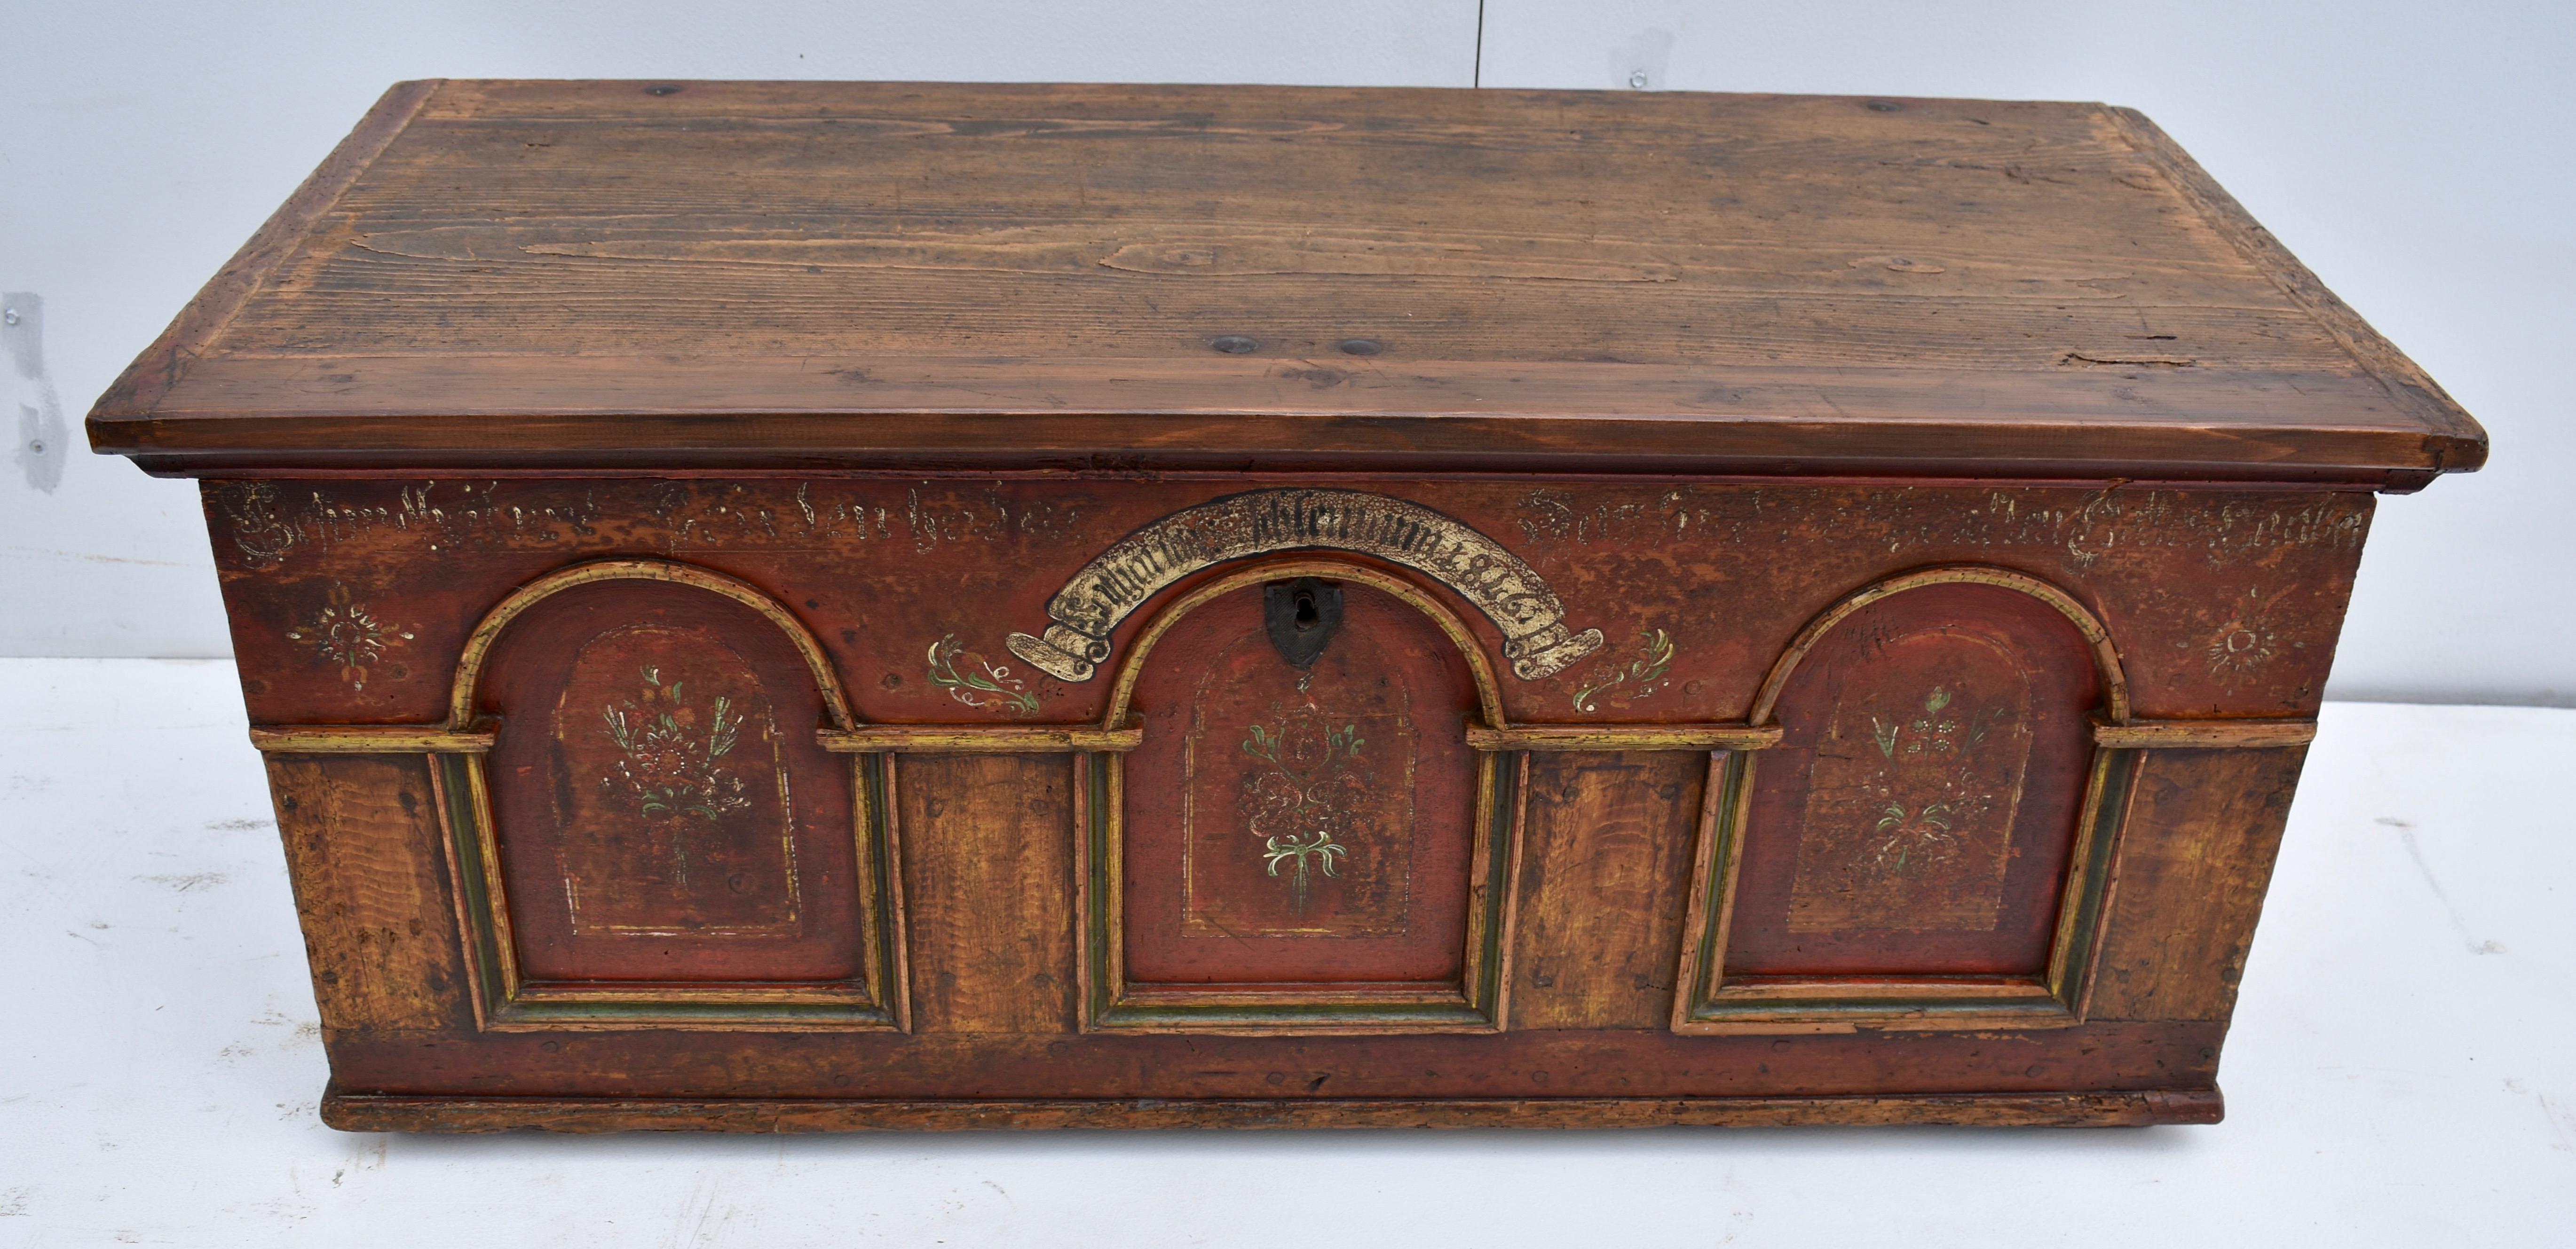 This lovely little German baroque dower chest has a lot going on. The front is absolutely beautiful. Three arched panels created by applied moldings, the lower parts trimmed in green, adorn the front, each with a paint-framed inner panel containing